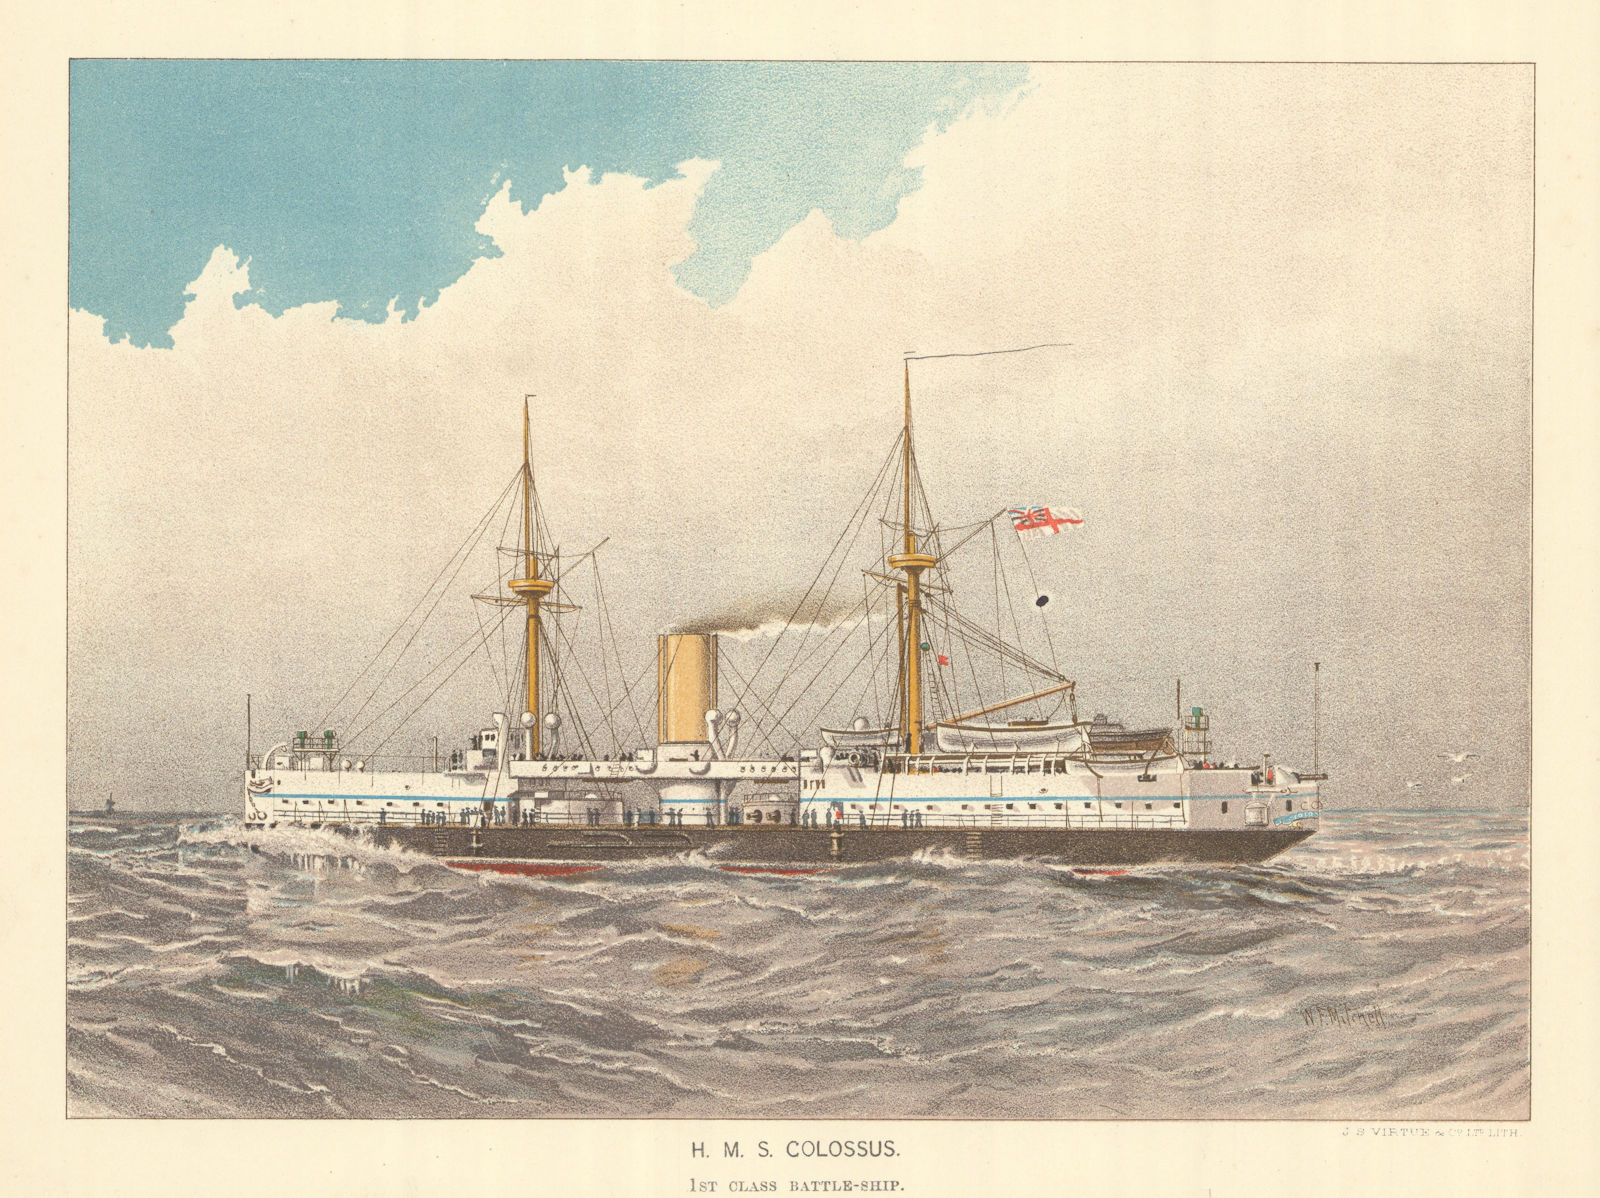 H.M.S. "Colossus", 1st class battleship (1882) by W.F. Mitchell. Royal Navy 1893